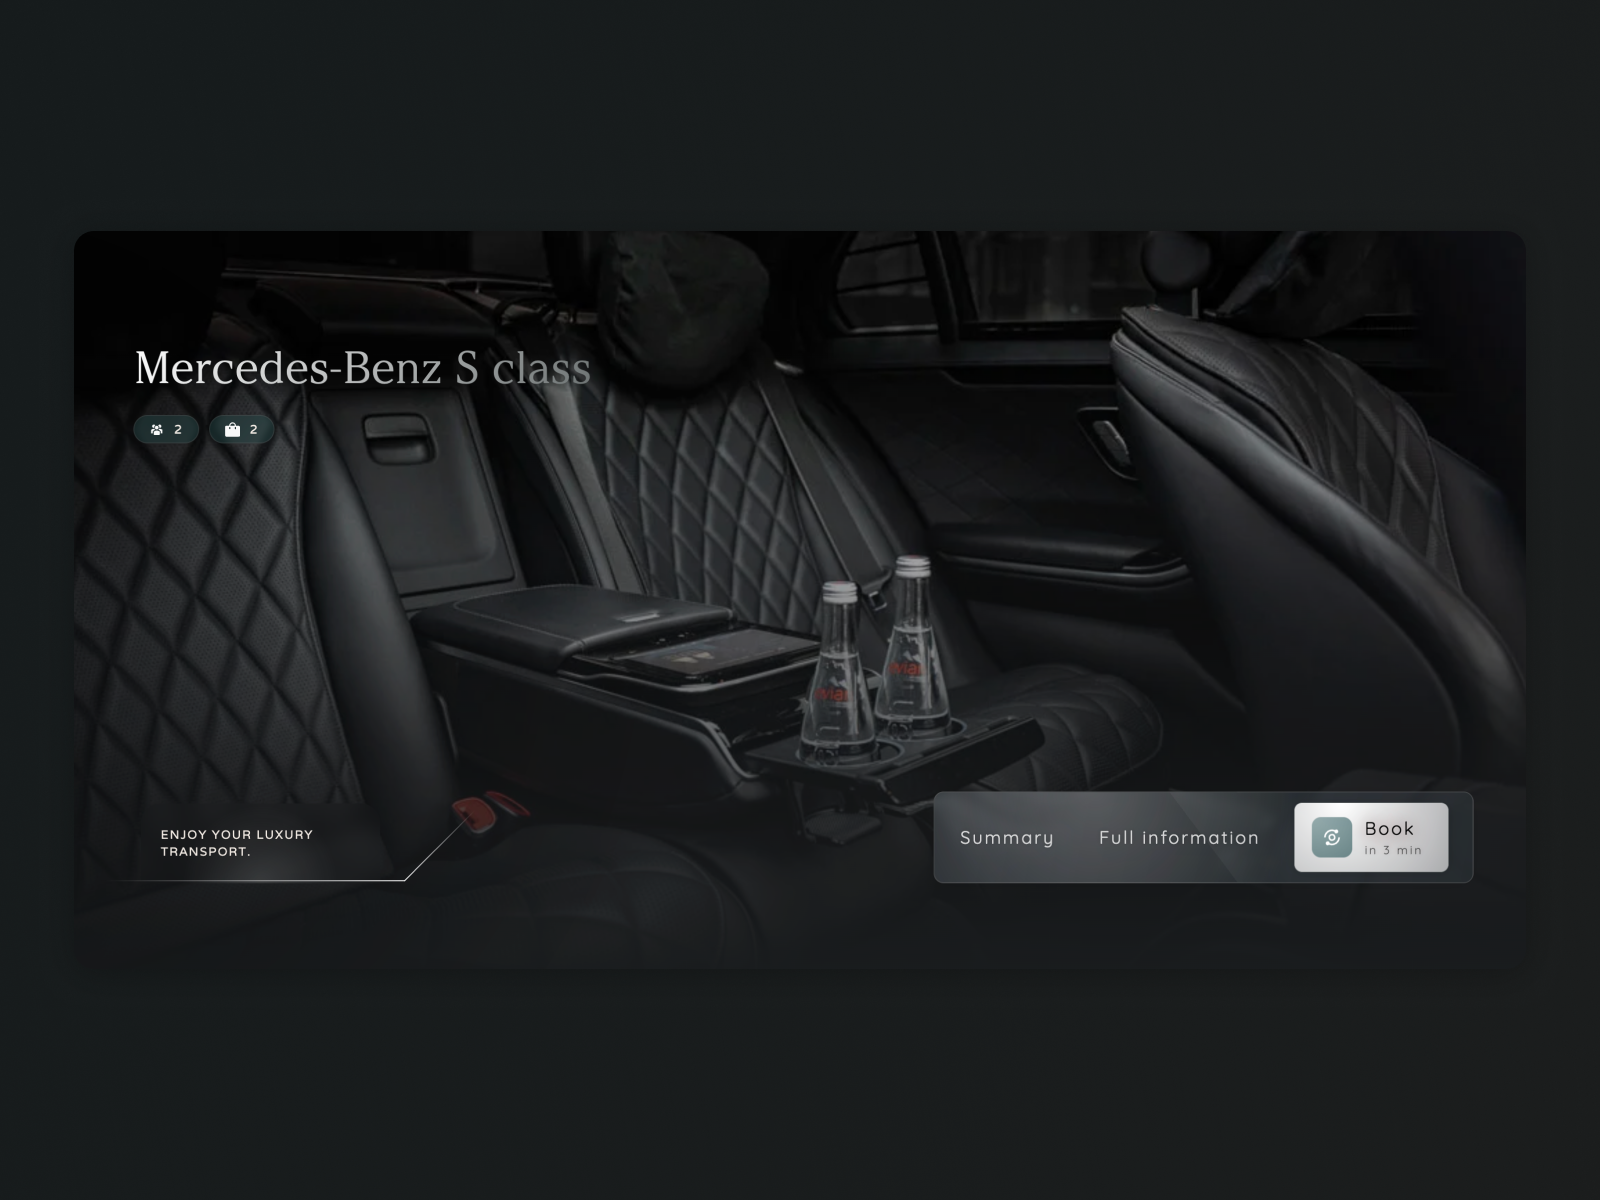 Single product page - Select your luxury vehicle